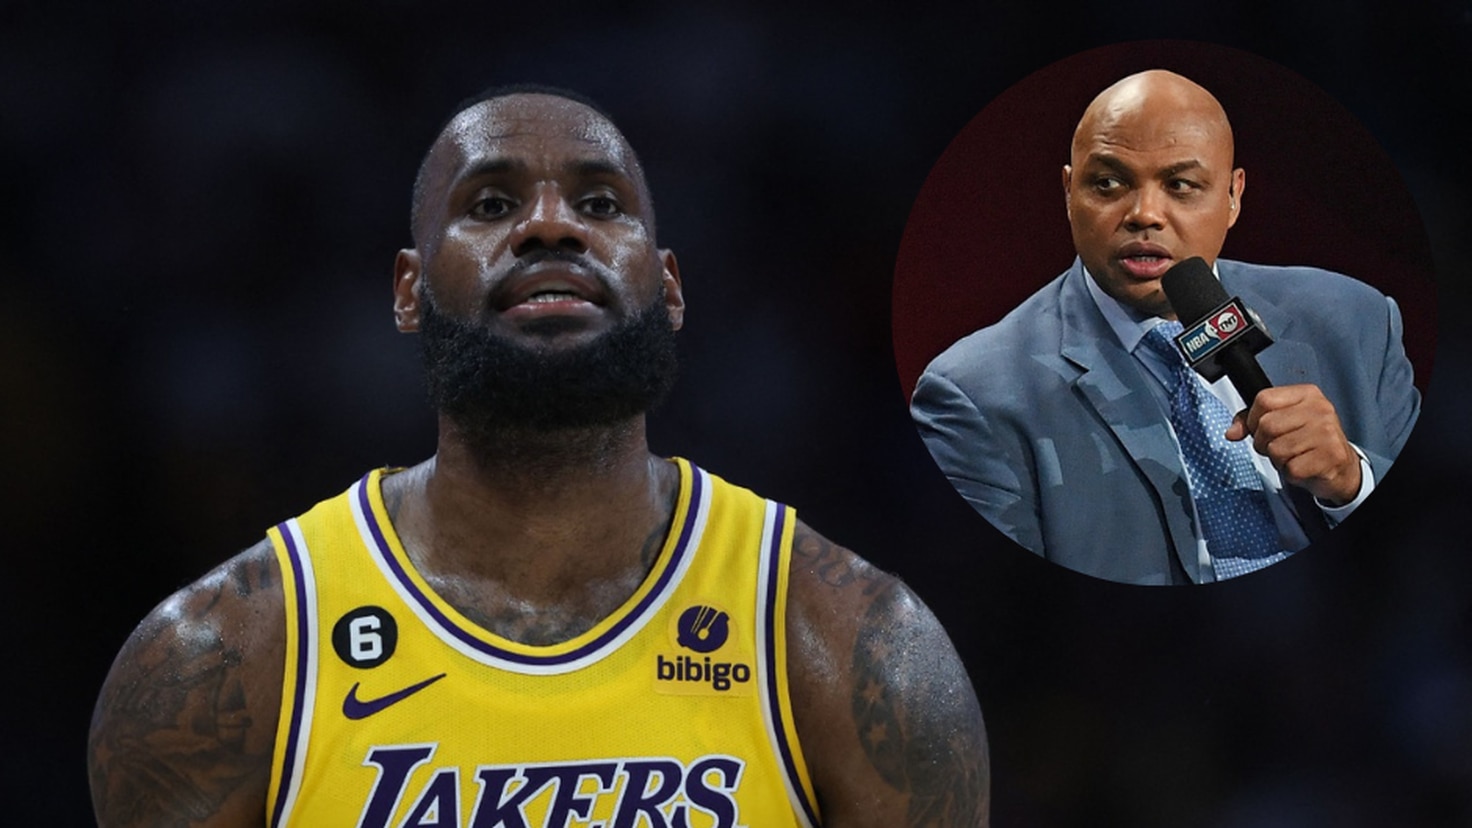 Charles Barkley lashes out at LeBron: 